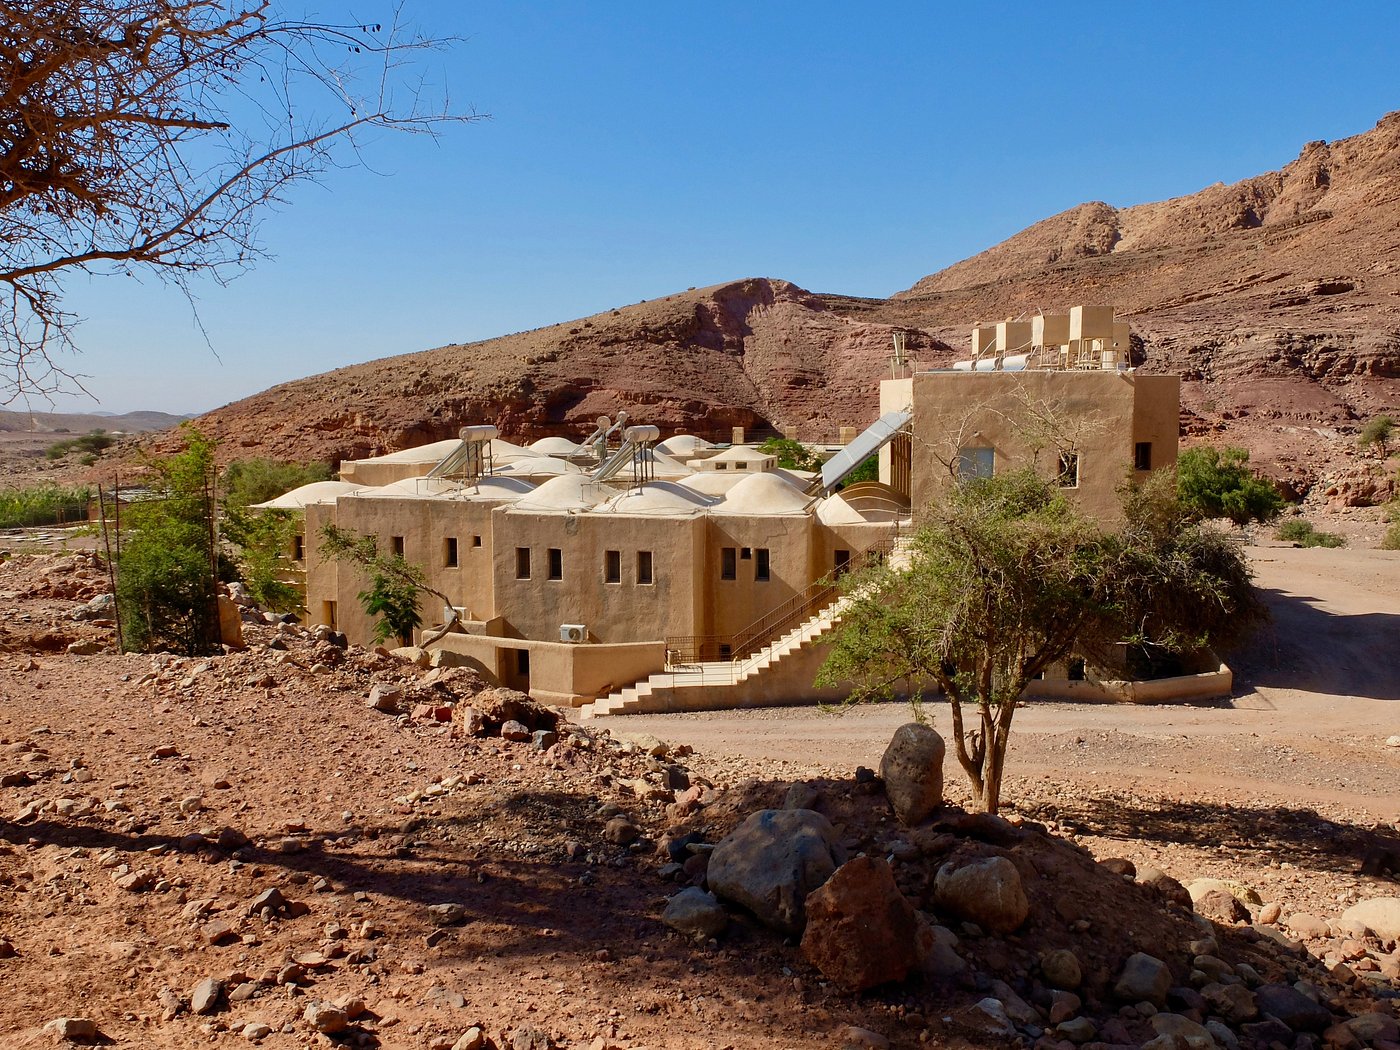 sustainable tourism examples - solar-powered Feynan ecolodge in Jordan